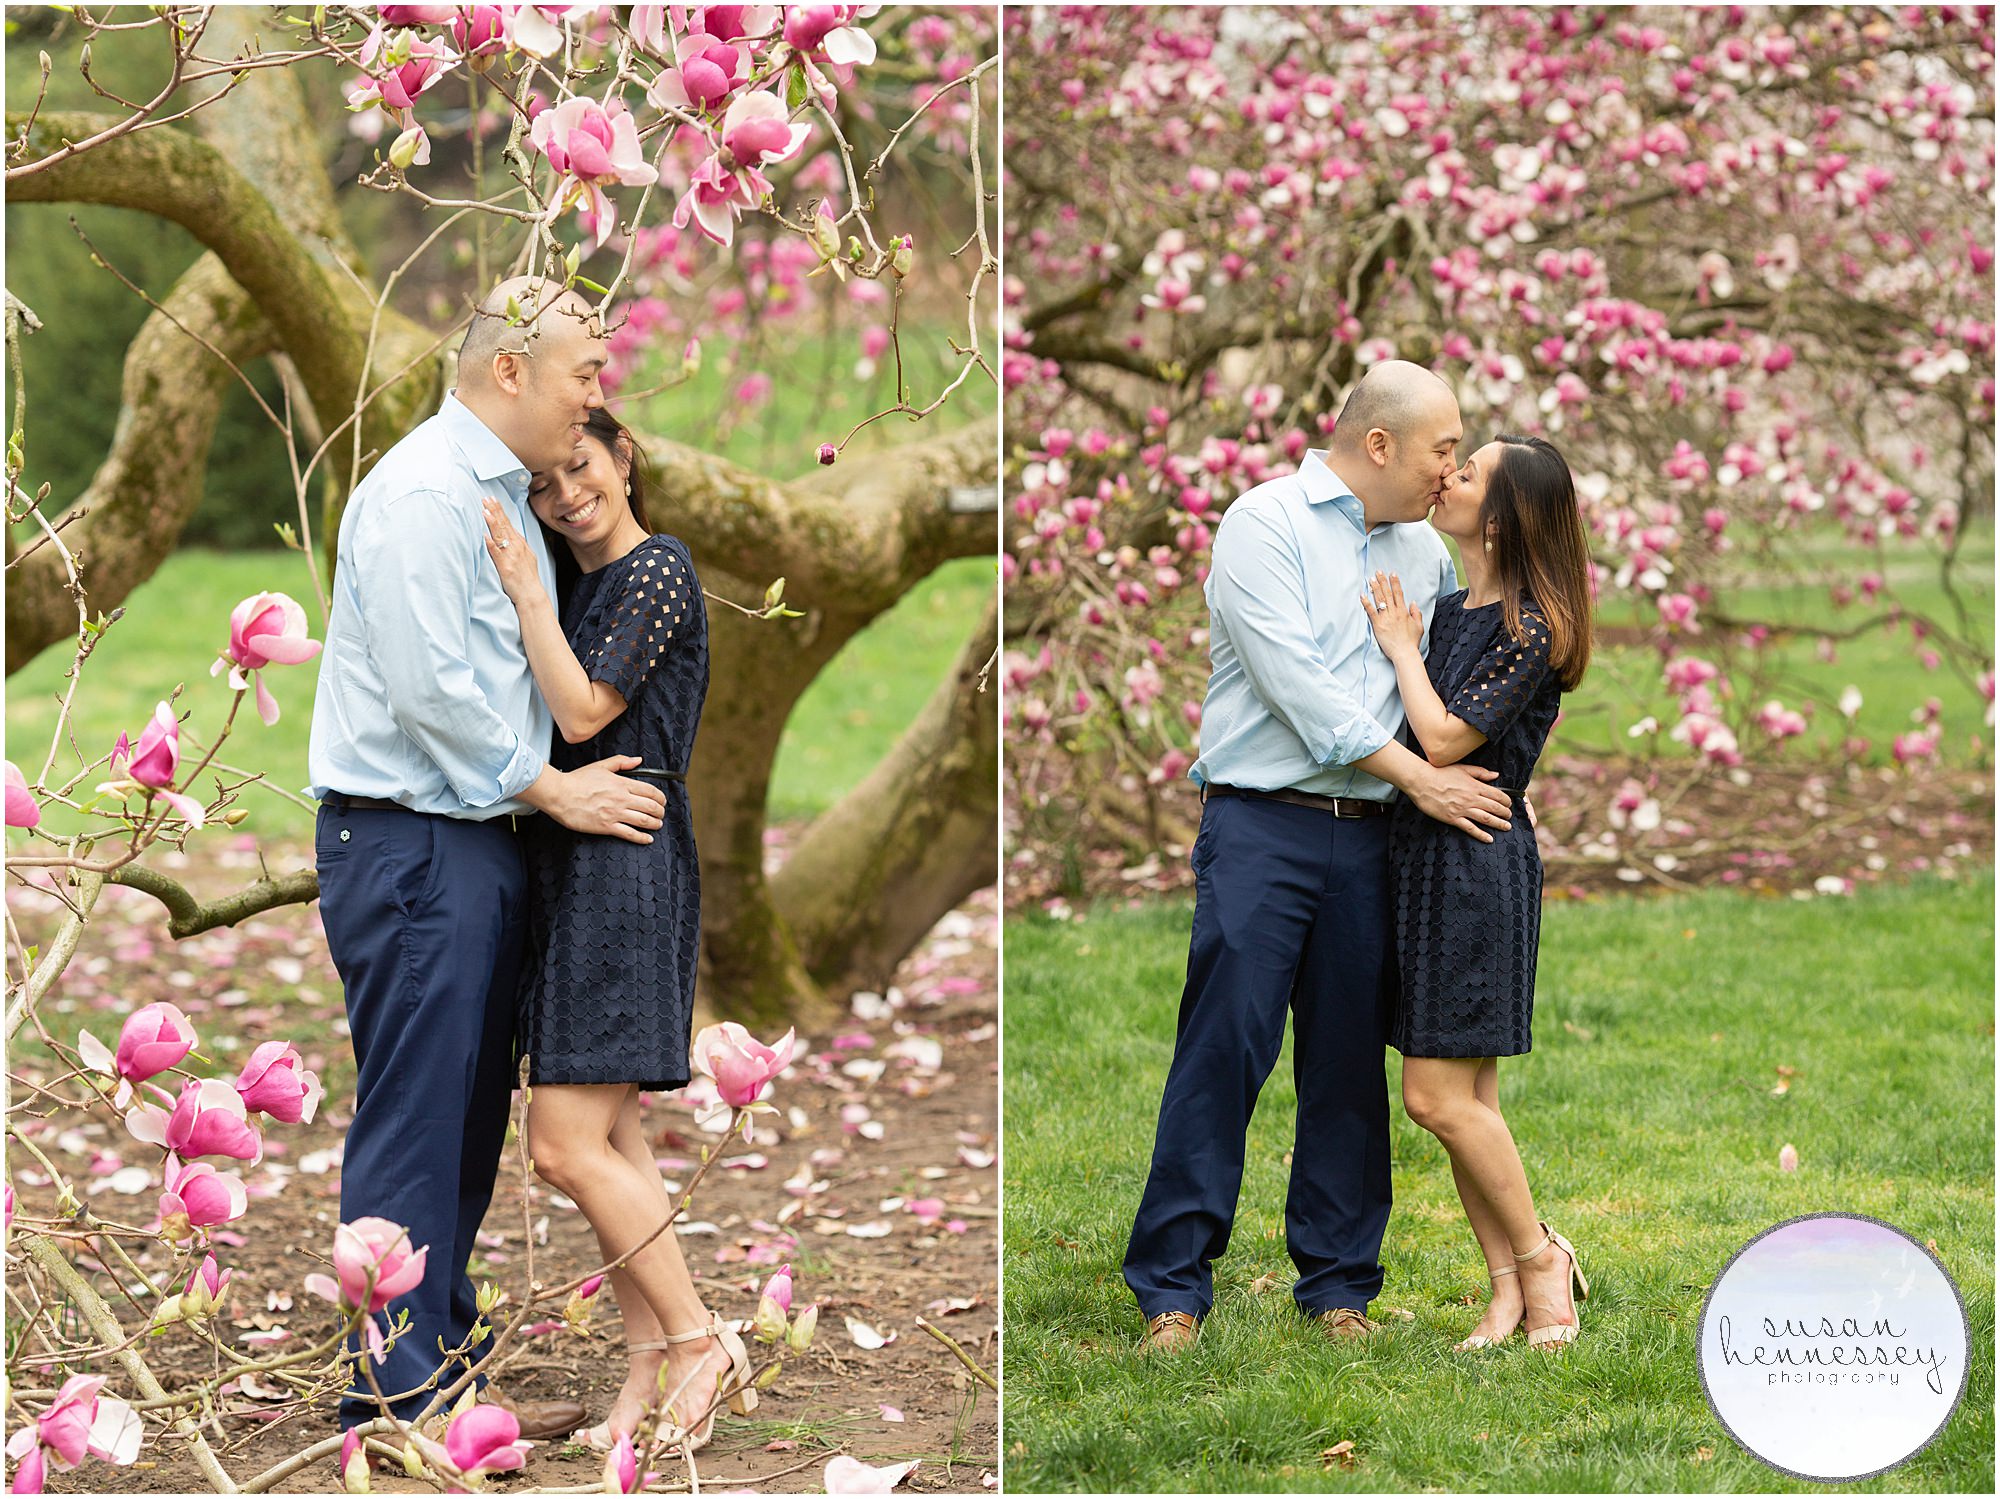 A Spring session at Longwood Gardens 